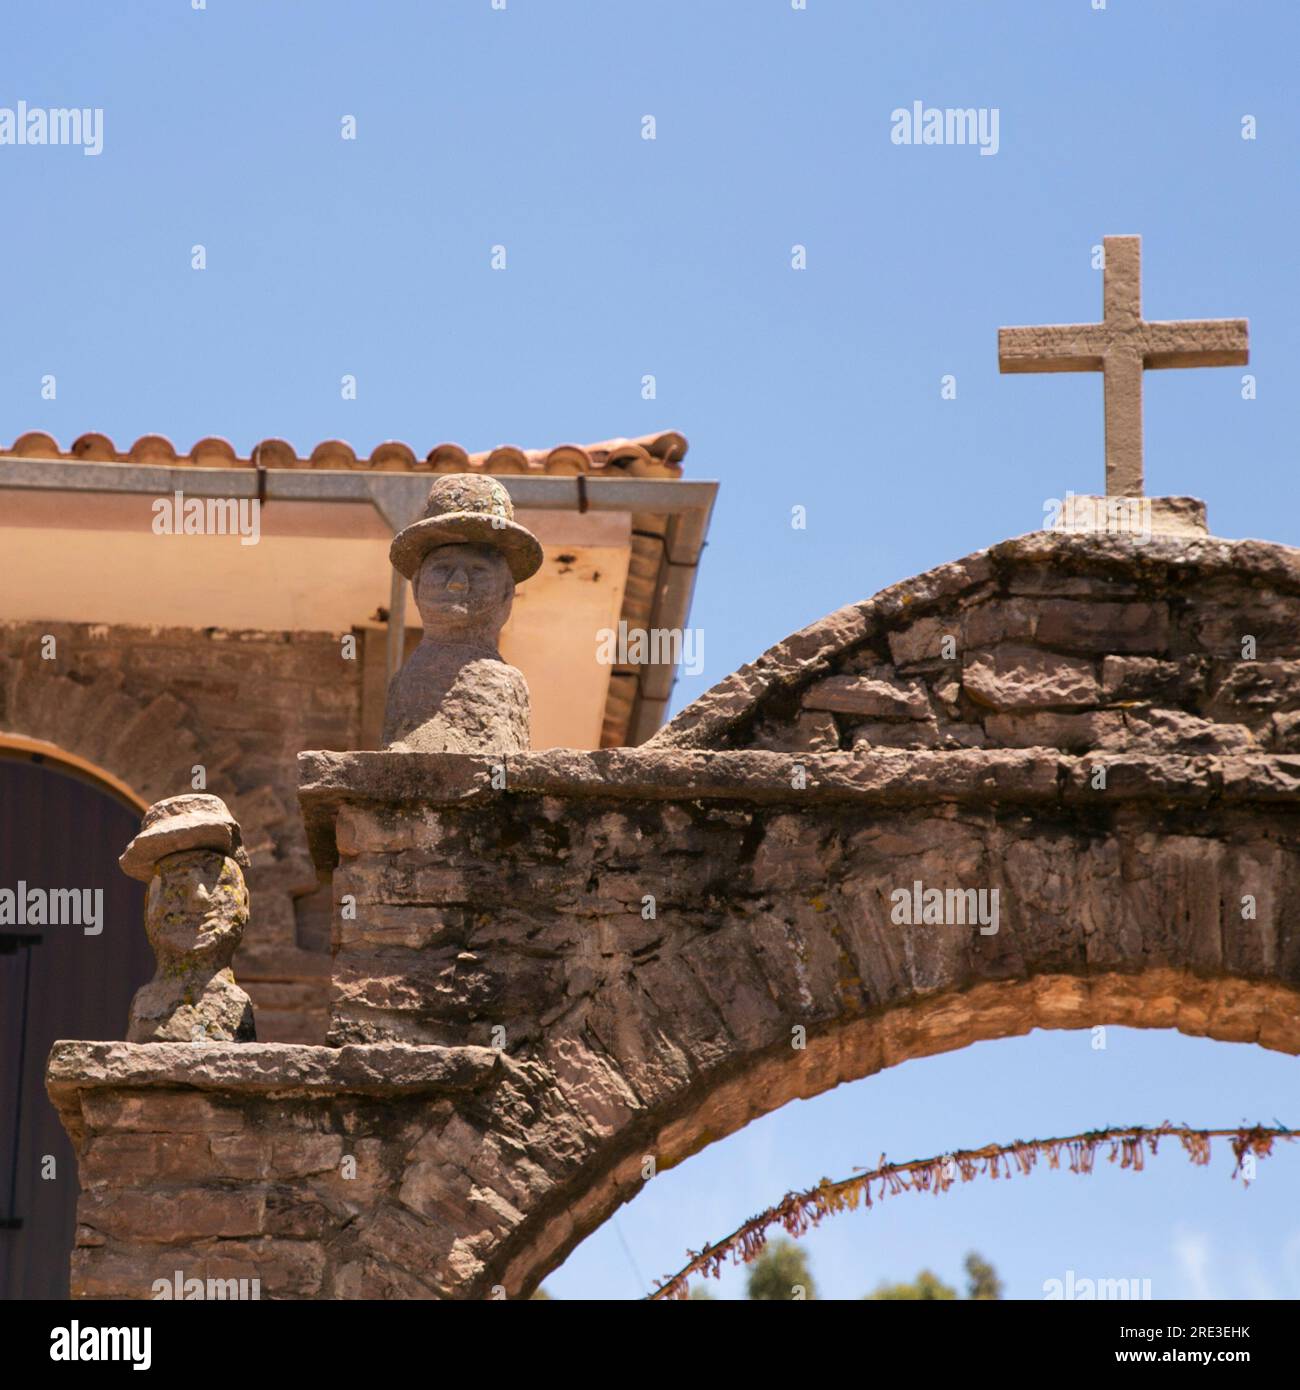 Stone heads carved into the arches on the island of Taquile on Lake Titicaca in Peru. Stock Photo